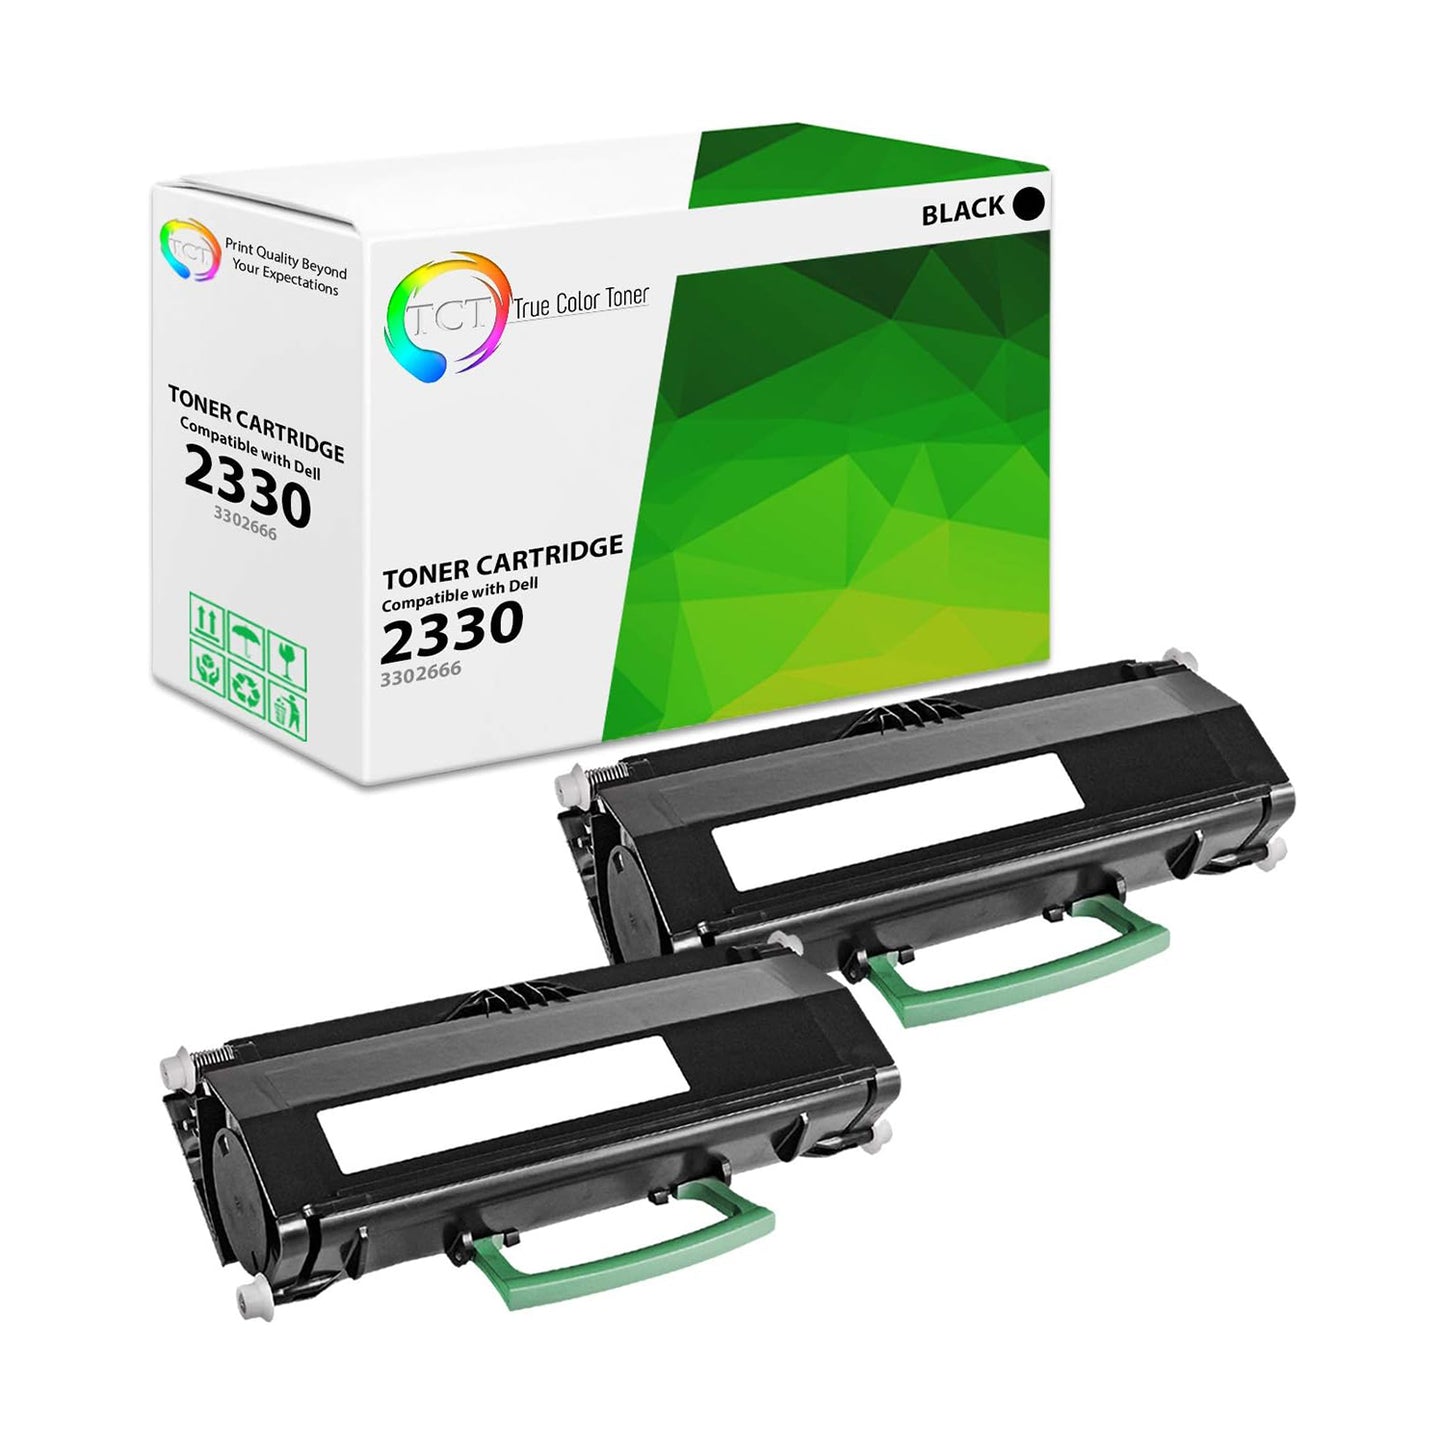 TCT Compatible Toner Cartridge Replacement for the Dell 2330 Series - 2 Pack Black